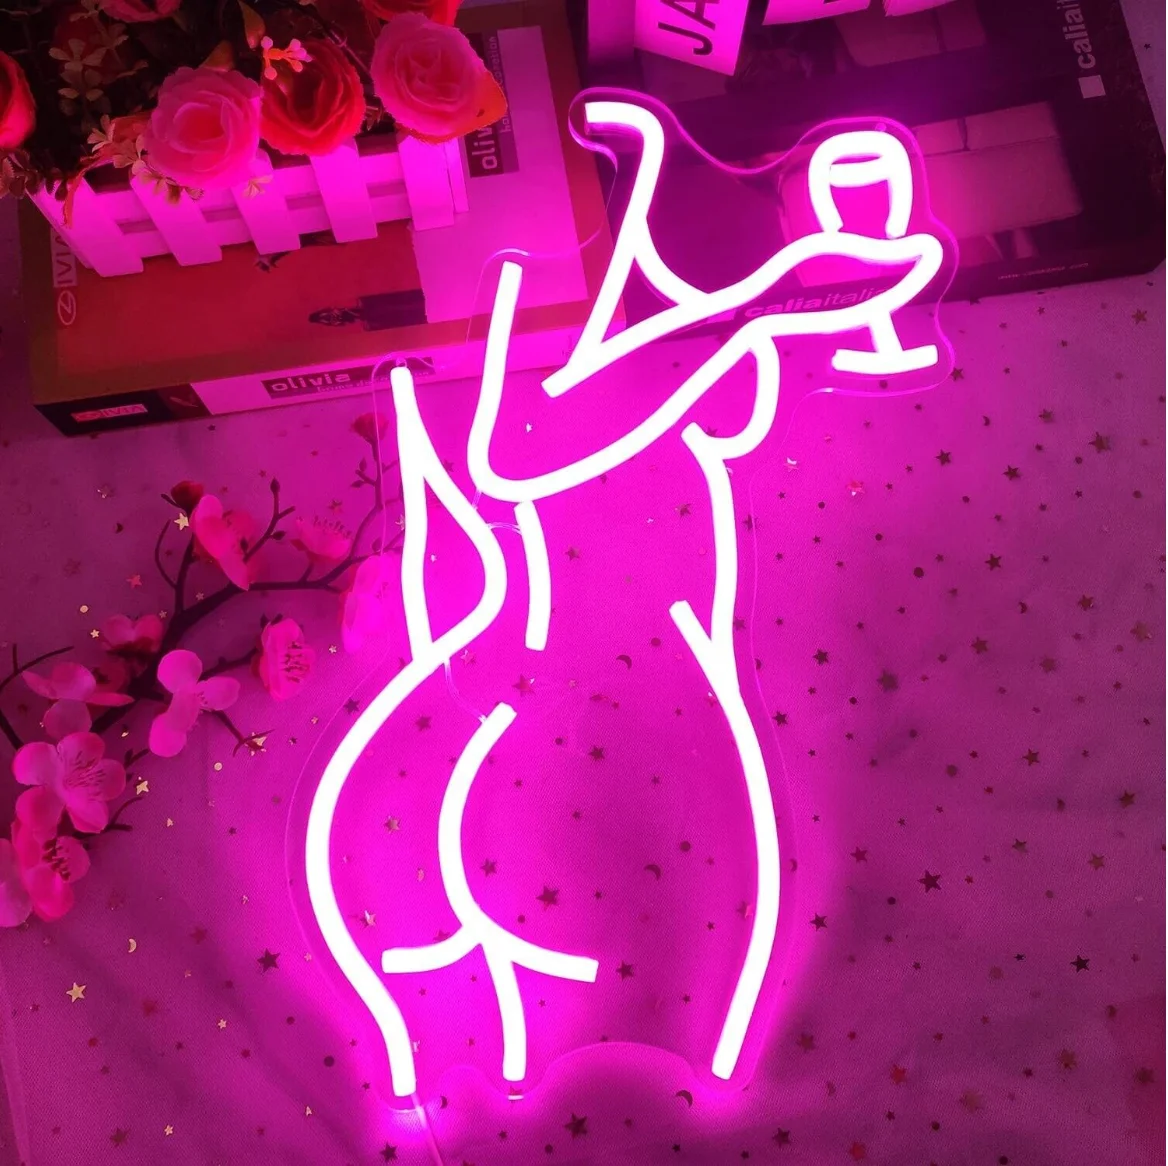 Ajoyferris Women's Back Neon Sign Adjustable LED Women's Neon Sign Neon Pink Sign Women's custom neon sign anime neon signs led sign living room neon sign game room neon sign wall decor best gift for girls with dimmer